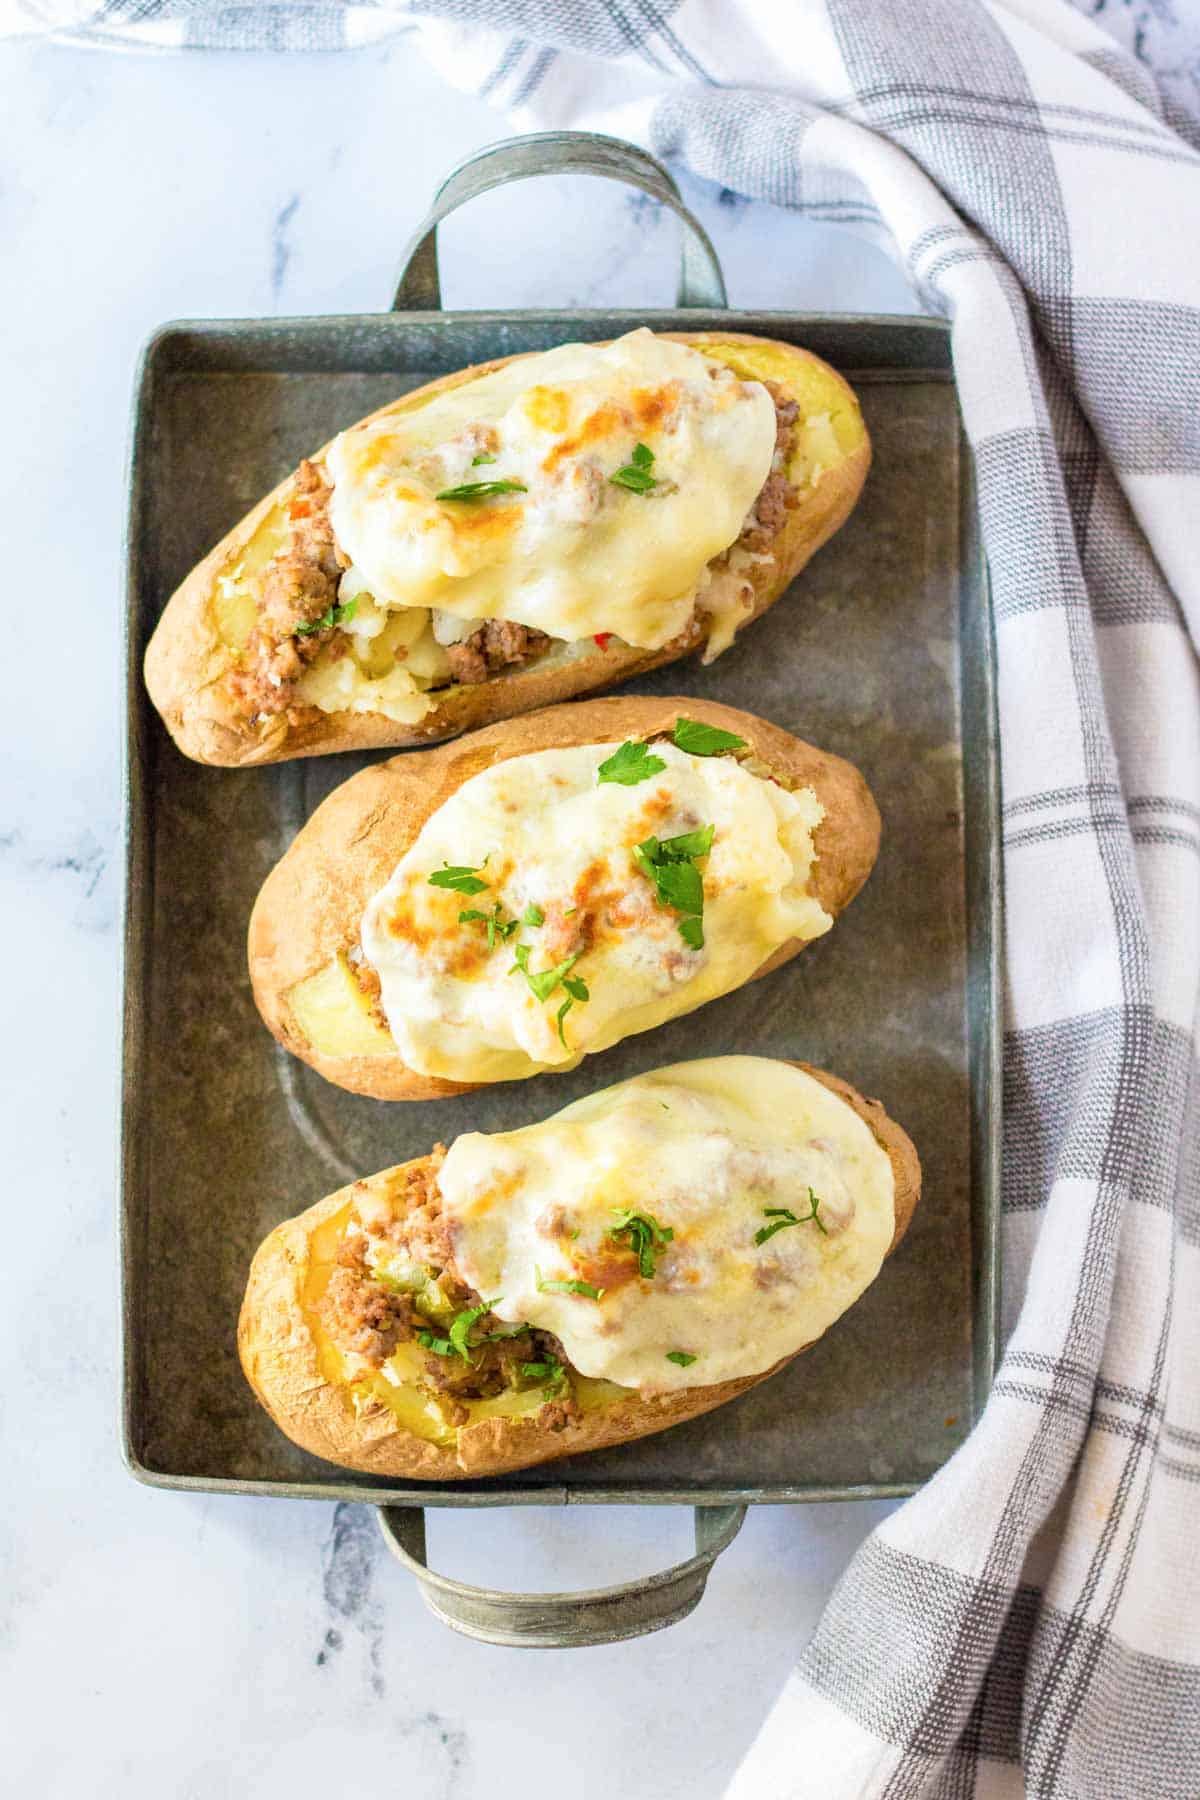 Three twice-baked potatoes with a beef and cheese filling on a metal tray.